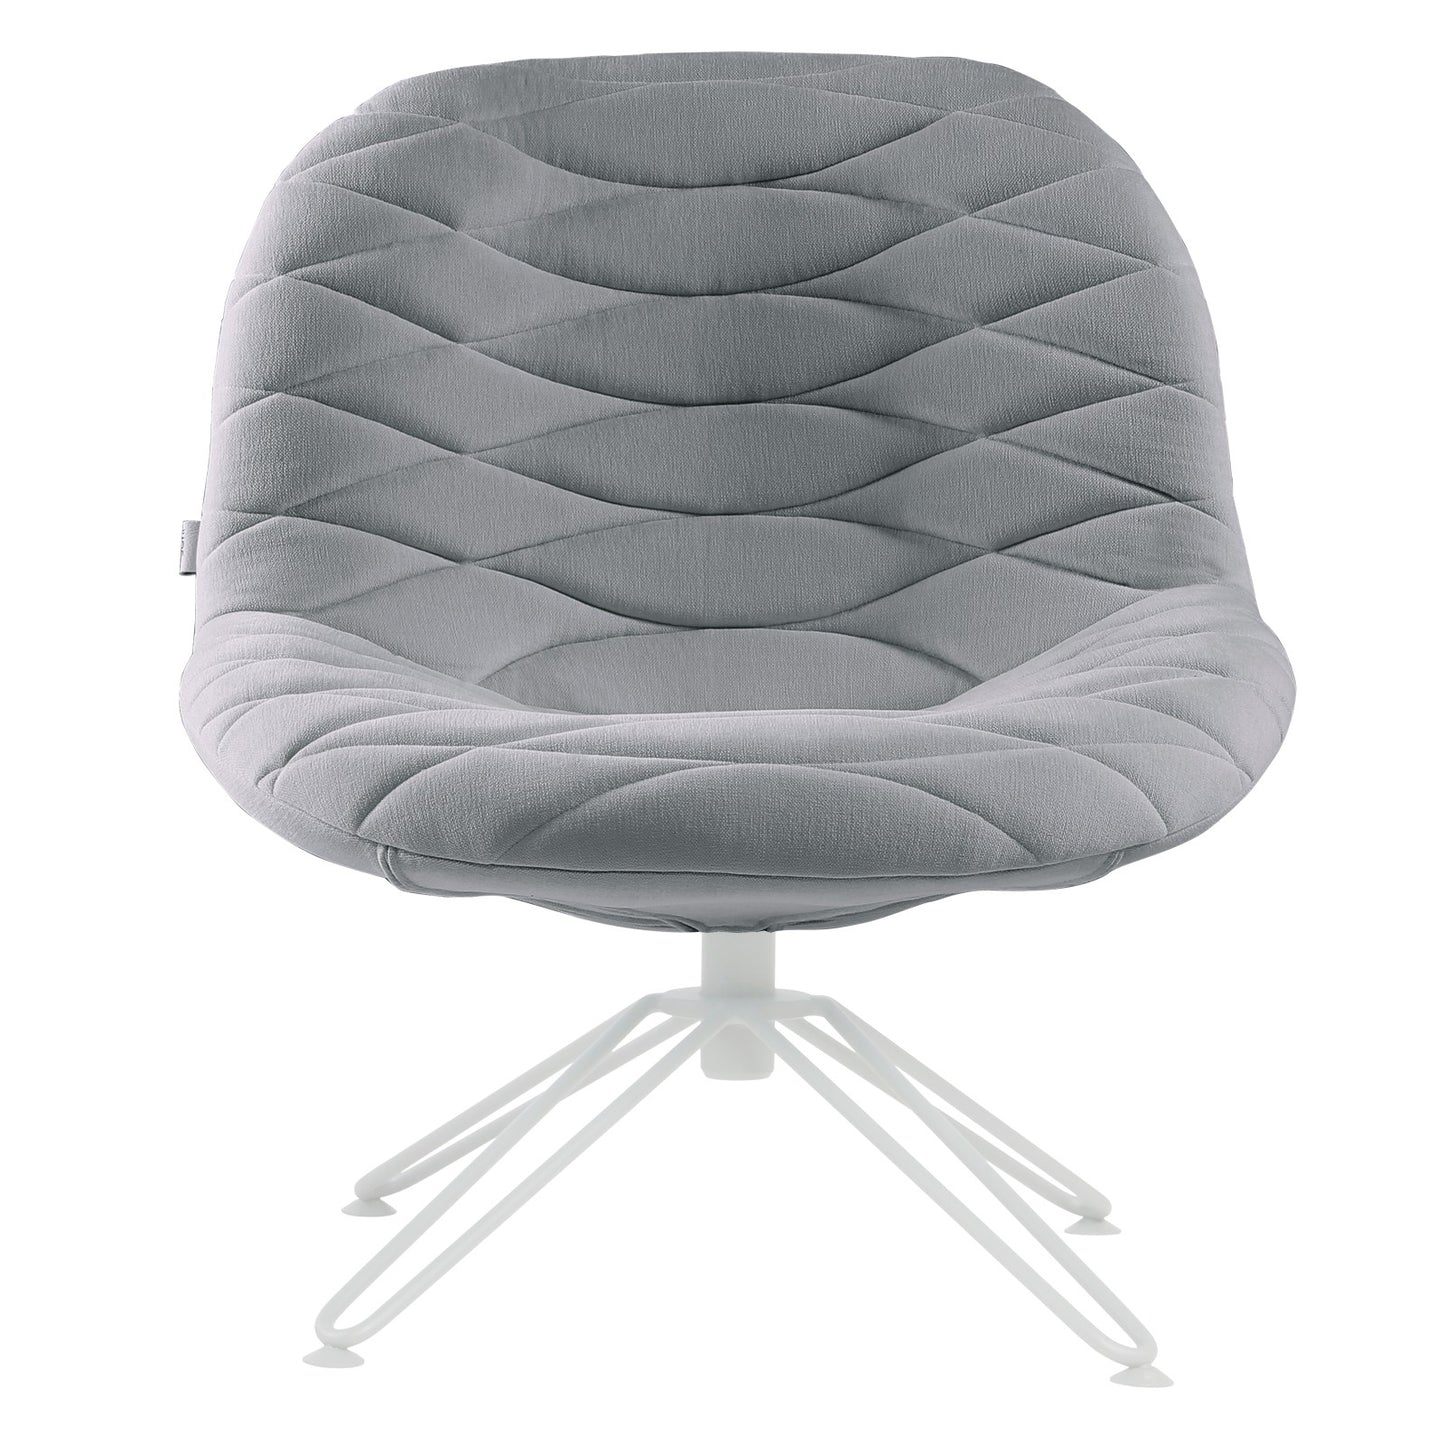 Lounge chair Mannequin Lounge 03 - Grey